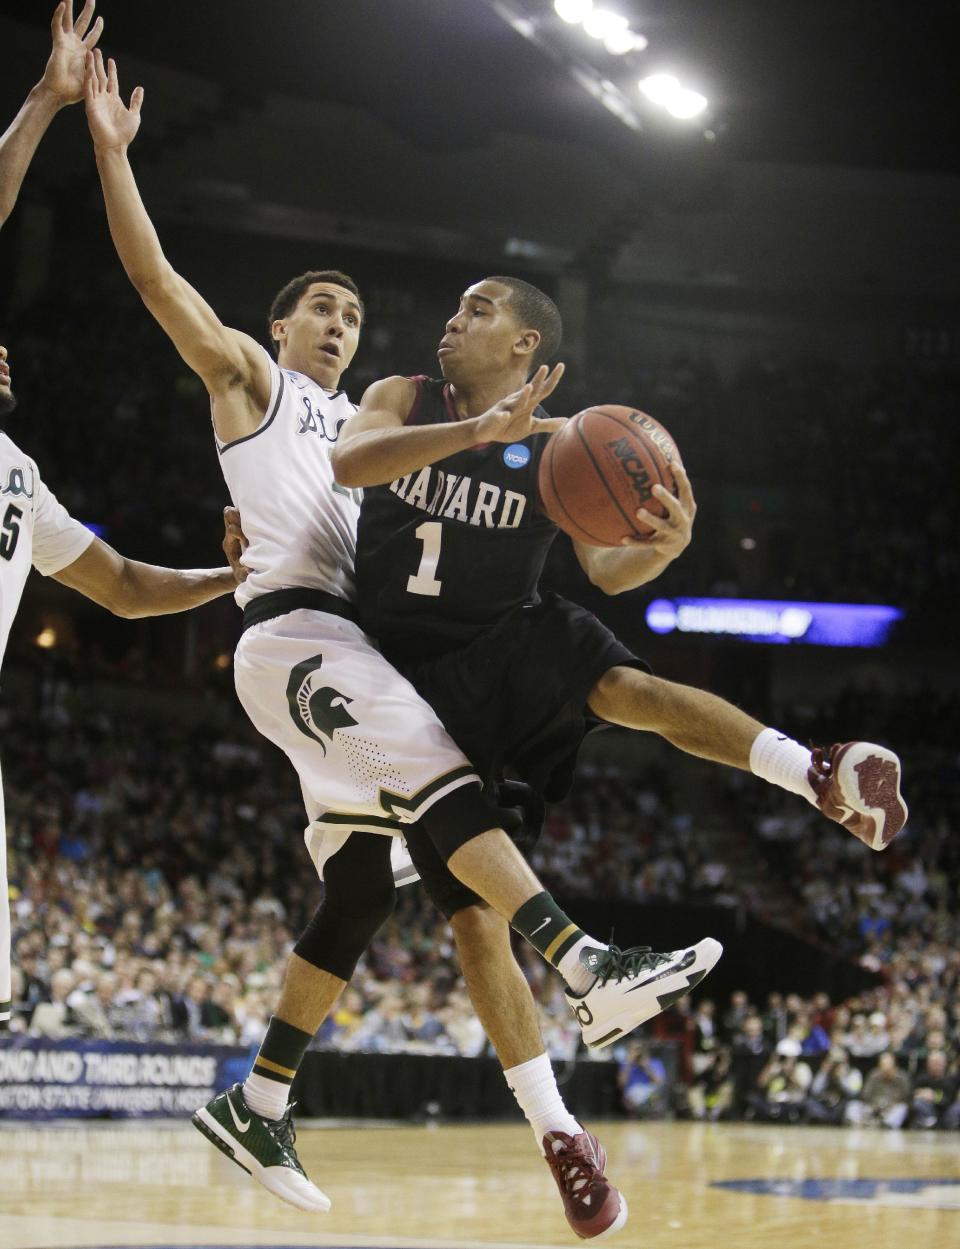 Harvard’s Siyani Chambers (1) passes around Michigan State’s Travis Trice in the second half during the third-round game of the NCAA men's college basketball tournament in Spokane, Wash., Saturday, March 22, 2014. Michigan State won 80-73. (AP Photo/Young Kwak)